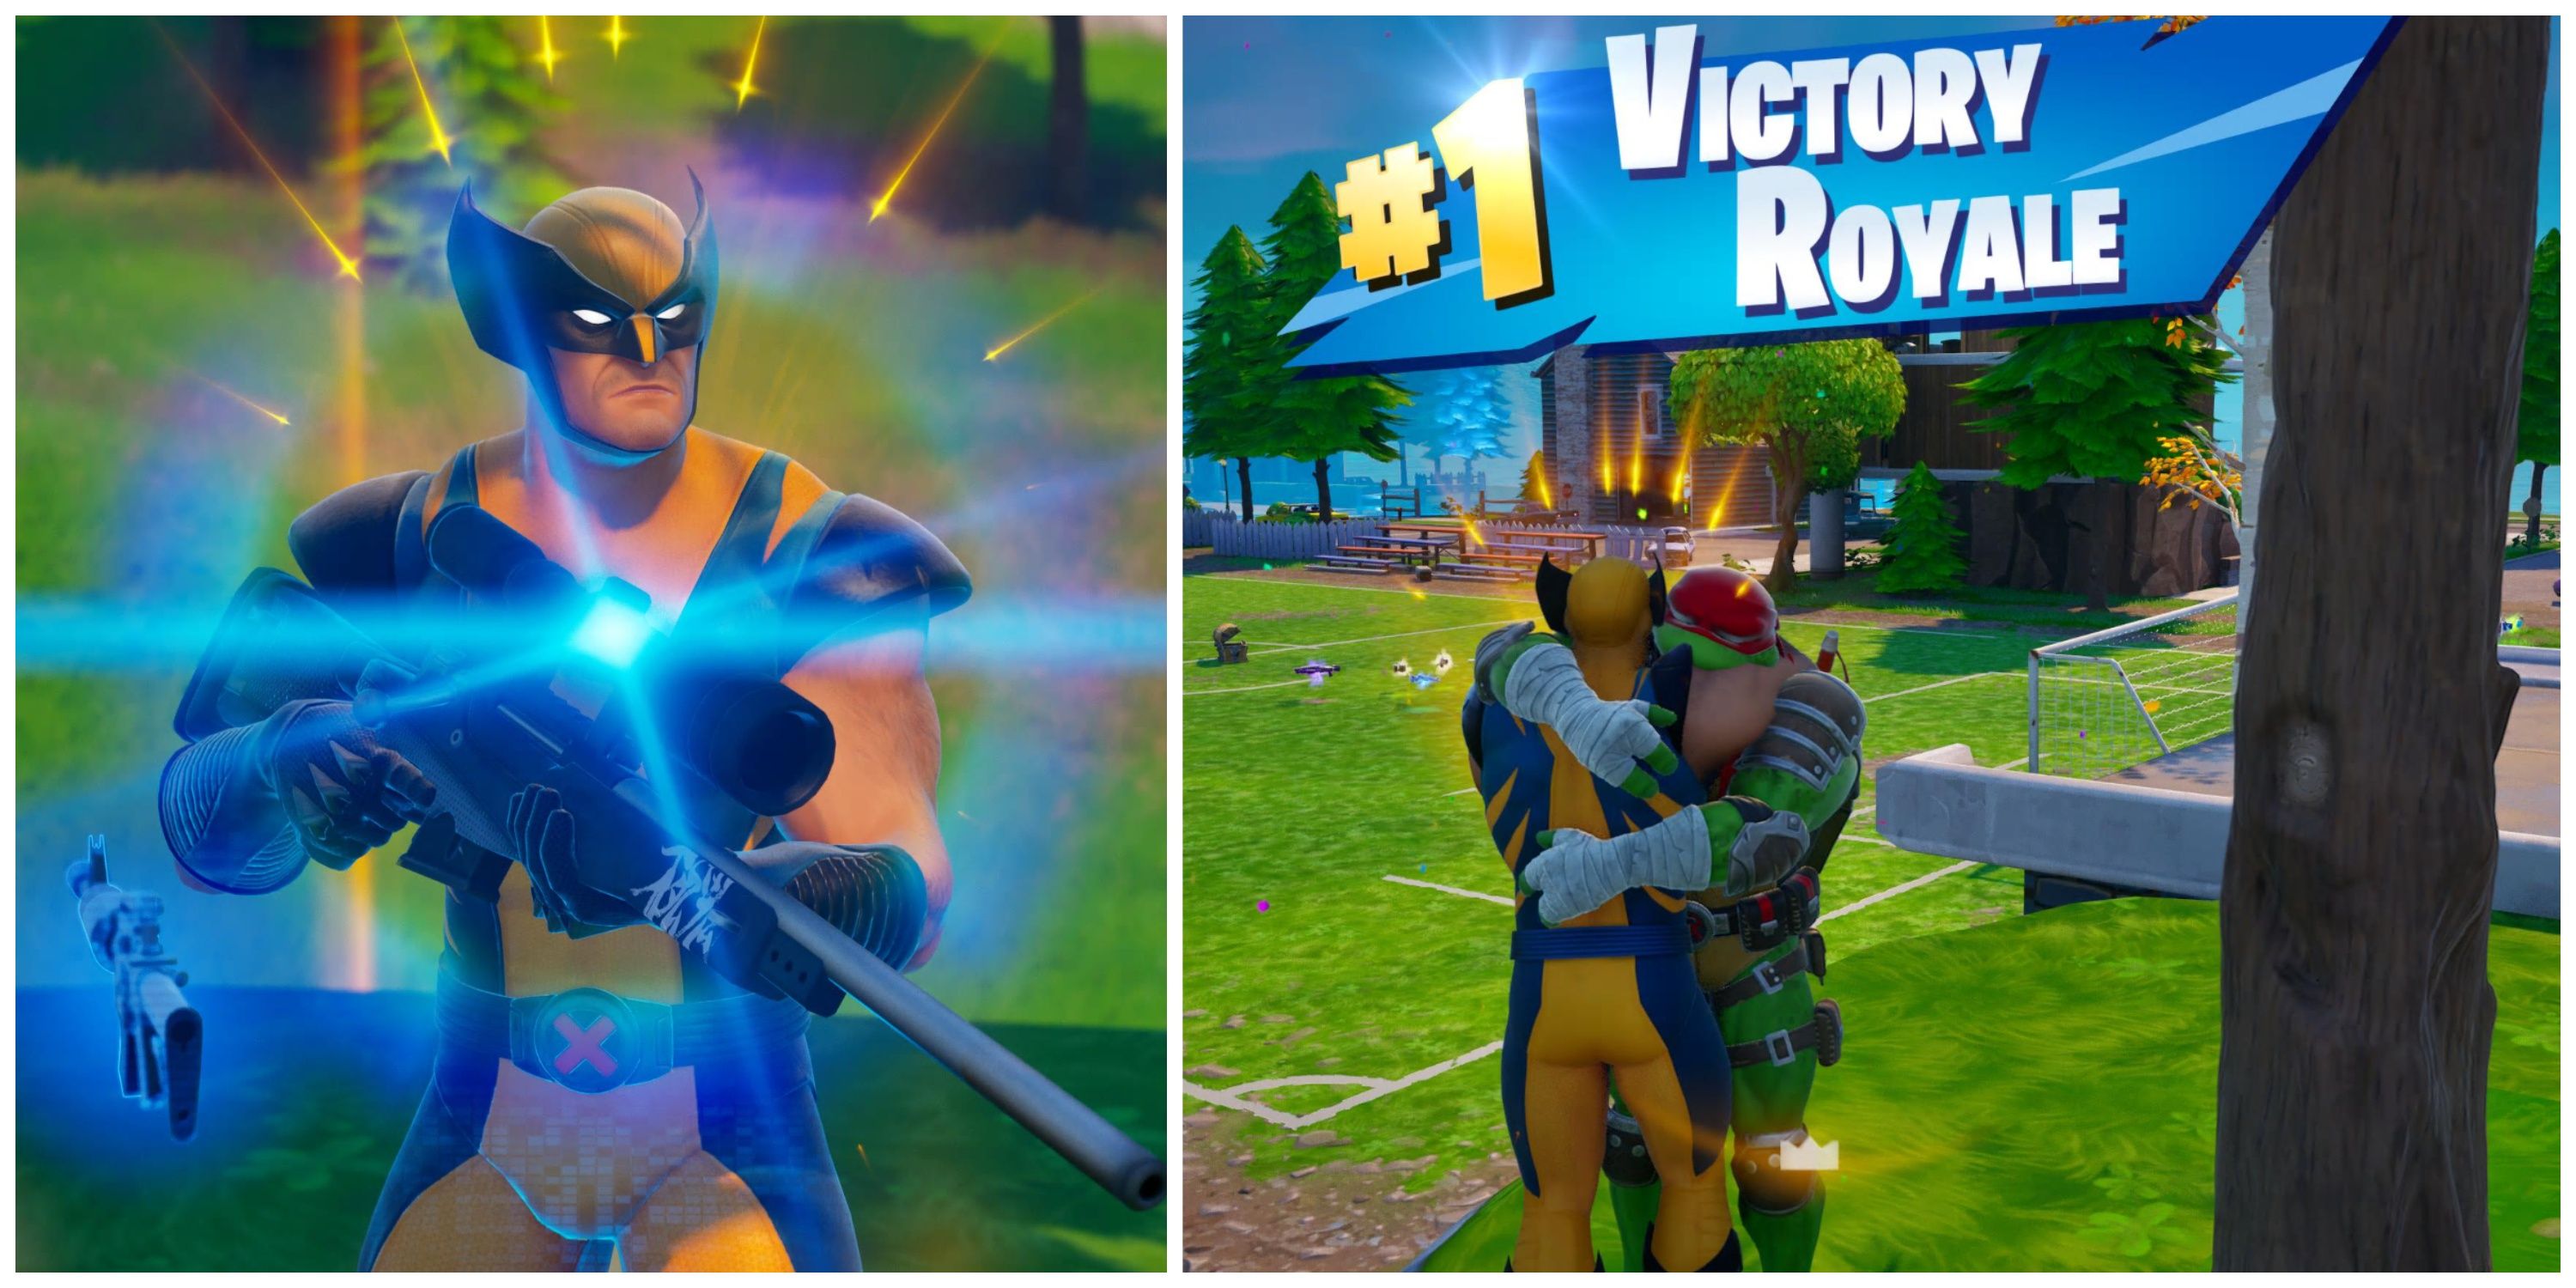 wolverine with a victory royale, raphael and wolverine hugging in pleasant park